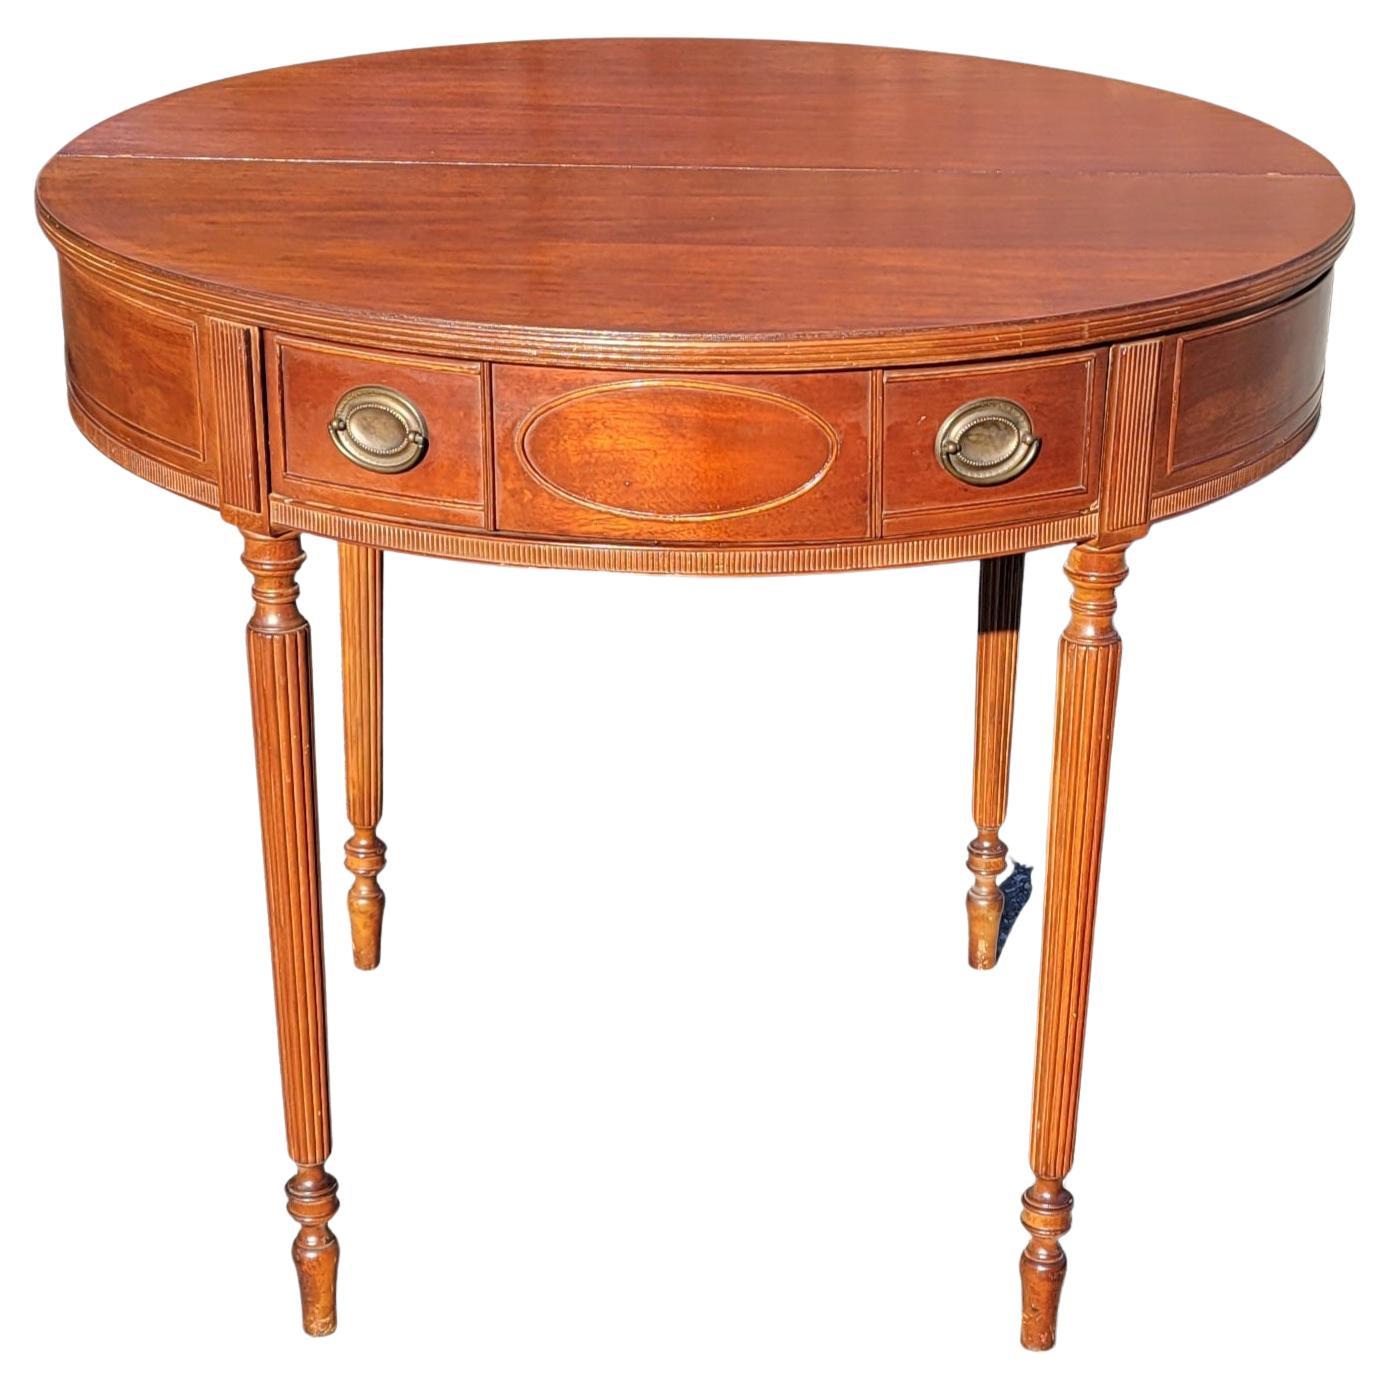 Varnished 19th Century Federal Hepplewhite Mahogany Demi-Lune Flip-Top Console Card Table For Sale